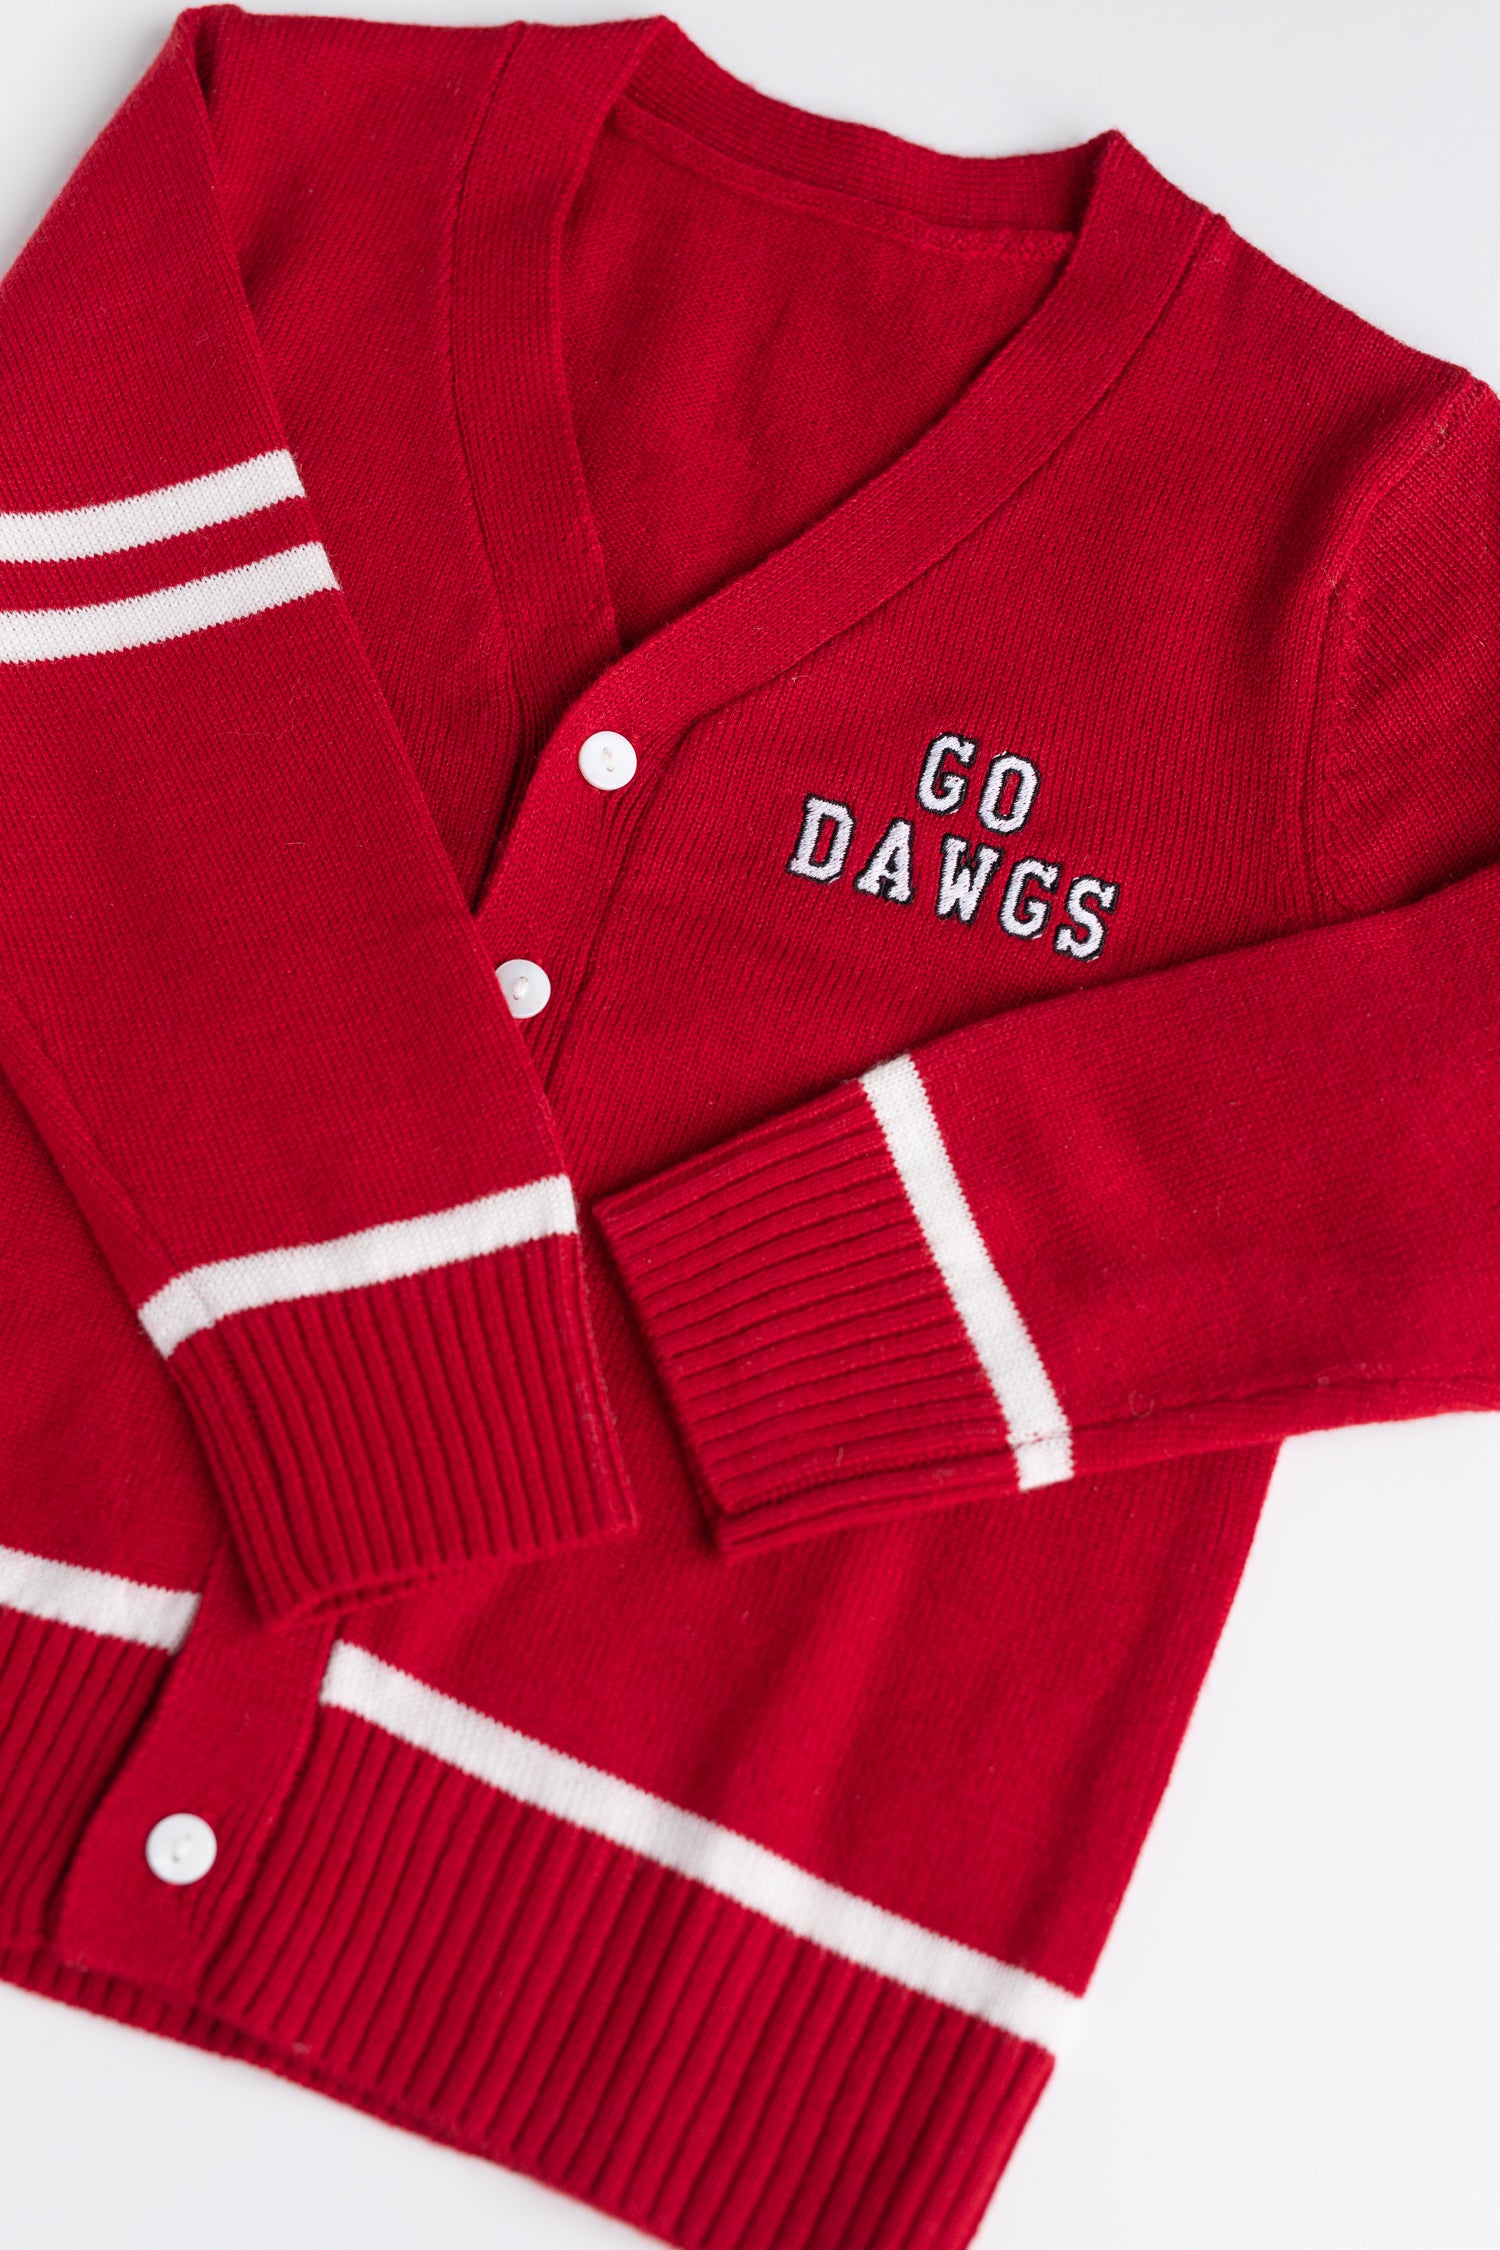 Red custom embriodered collegiate cardigan for toddler boys